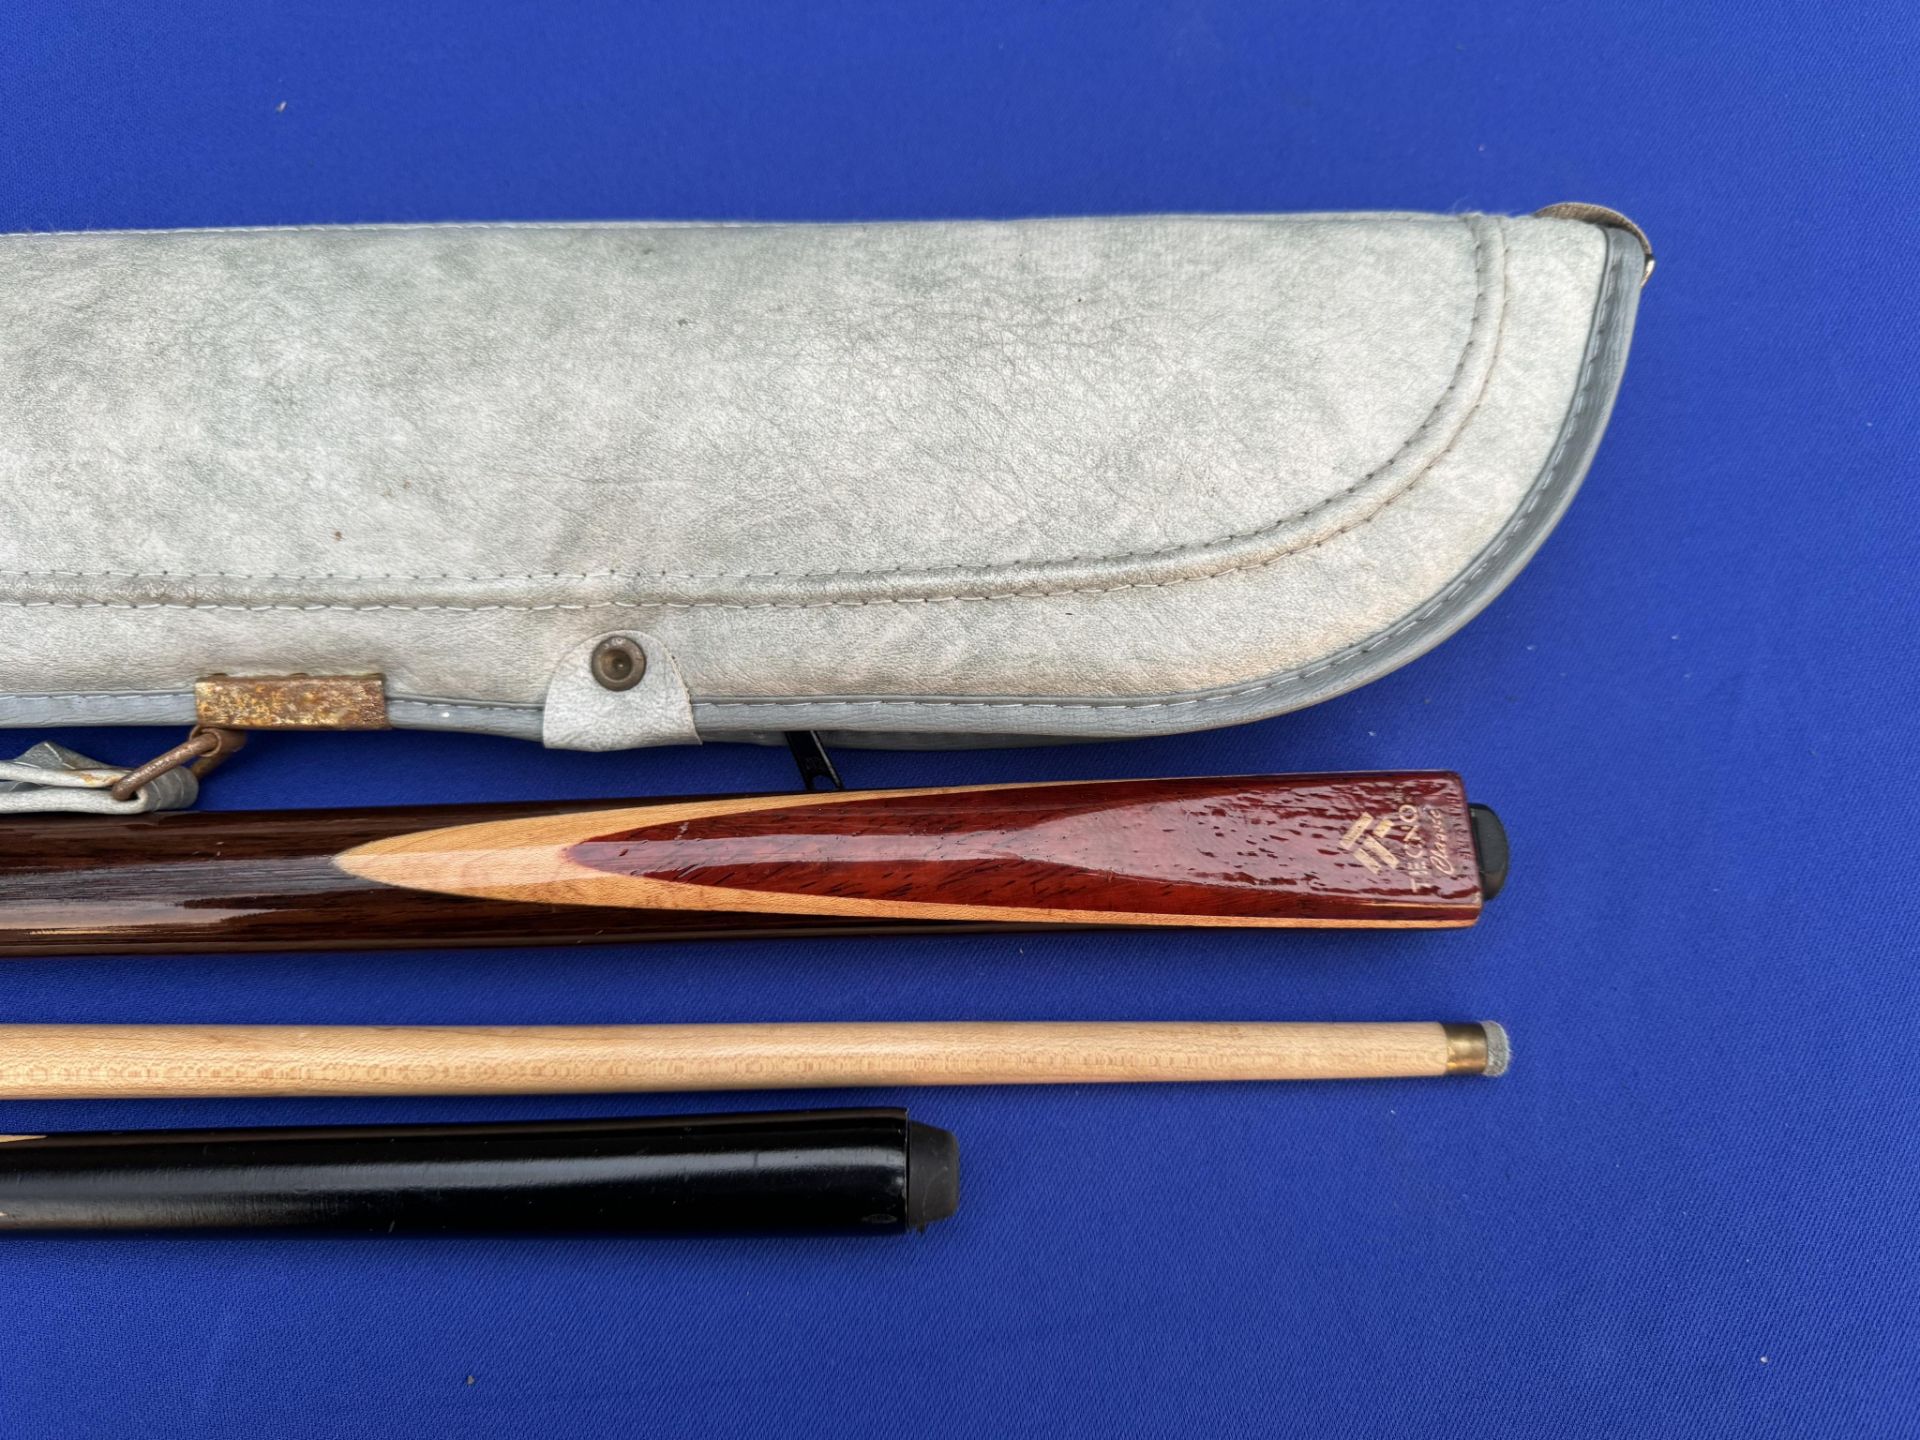 Techno Classic Snooker Cue with case and stubby space saver mini cue - Image 2 of 2